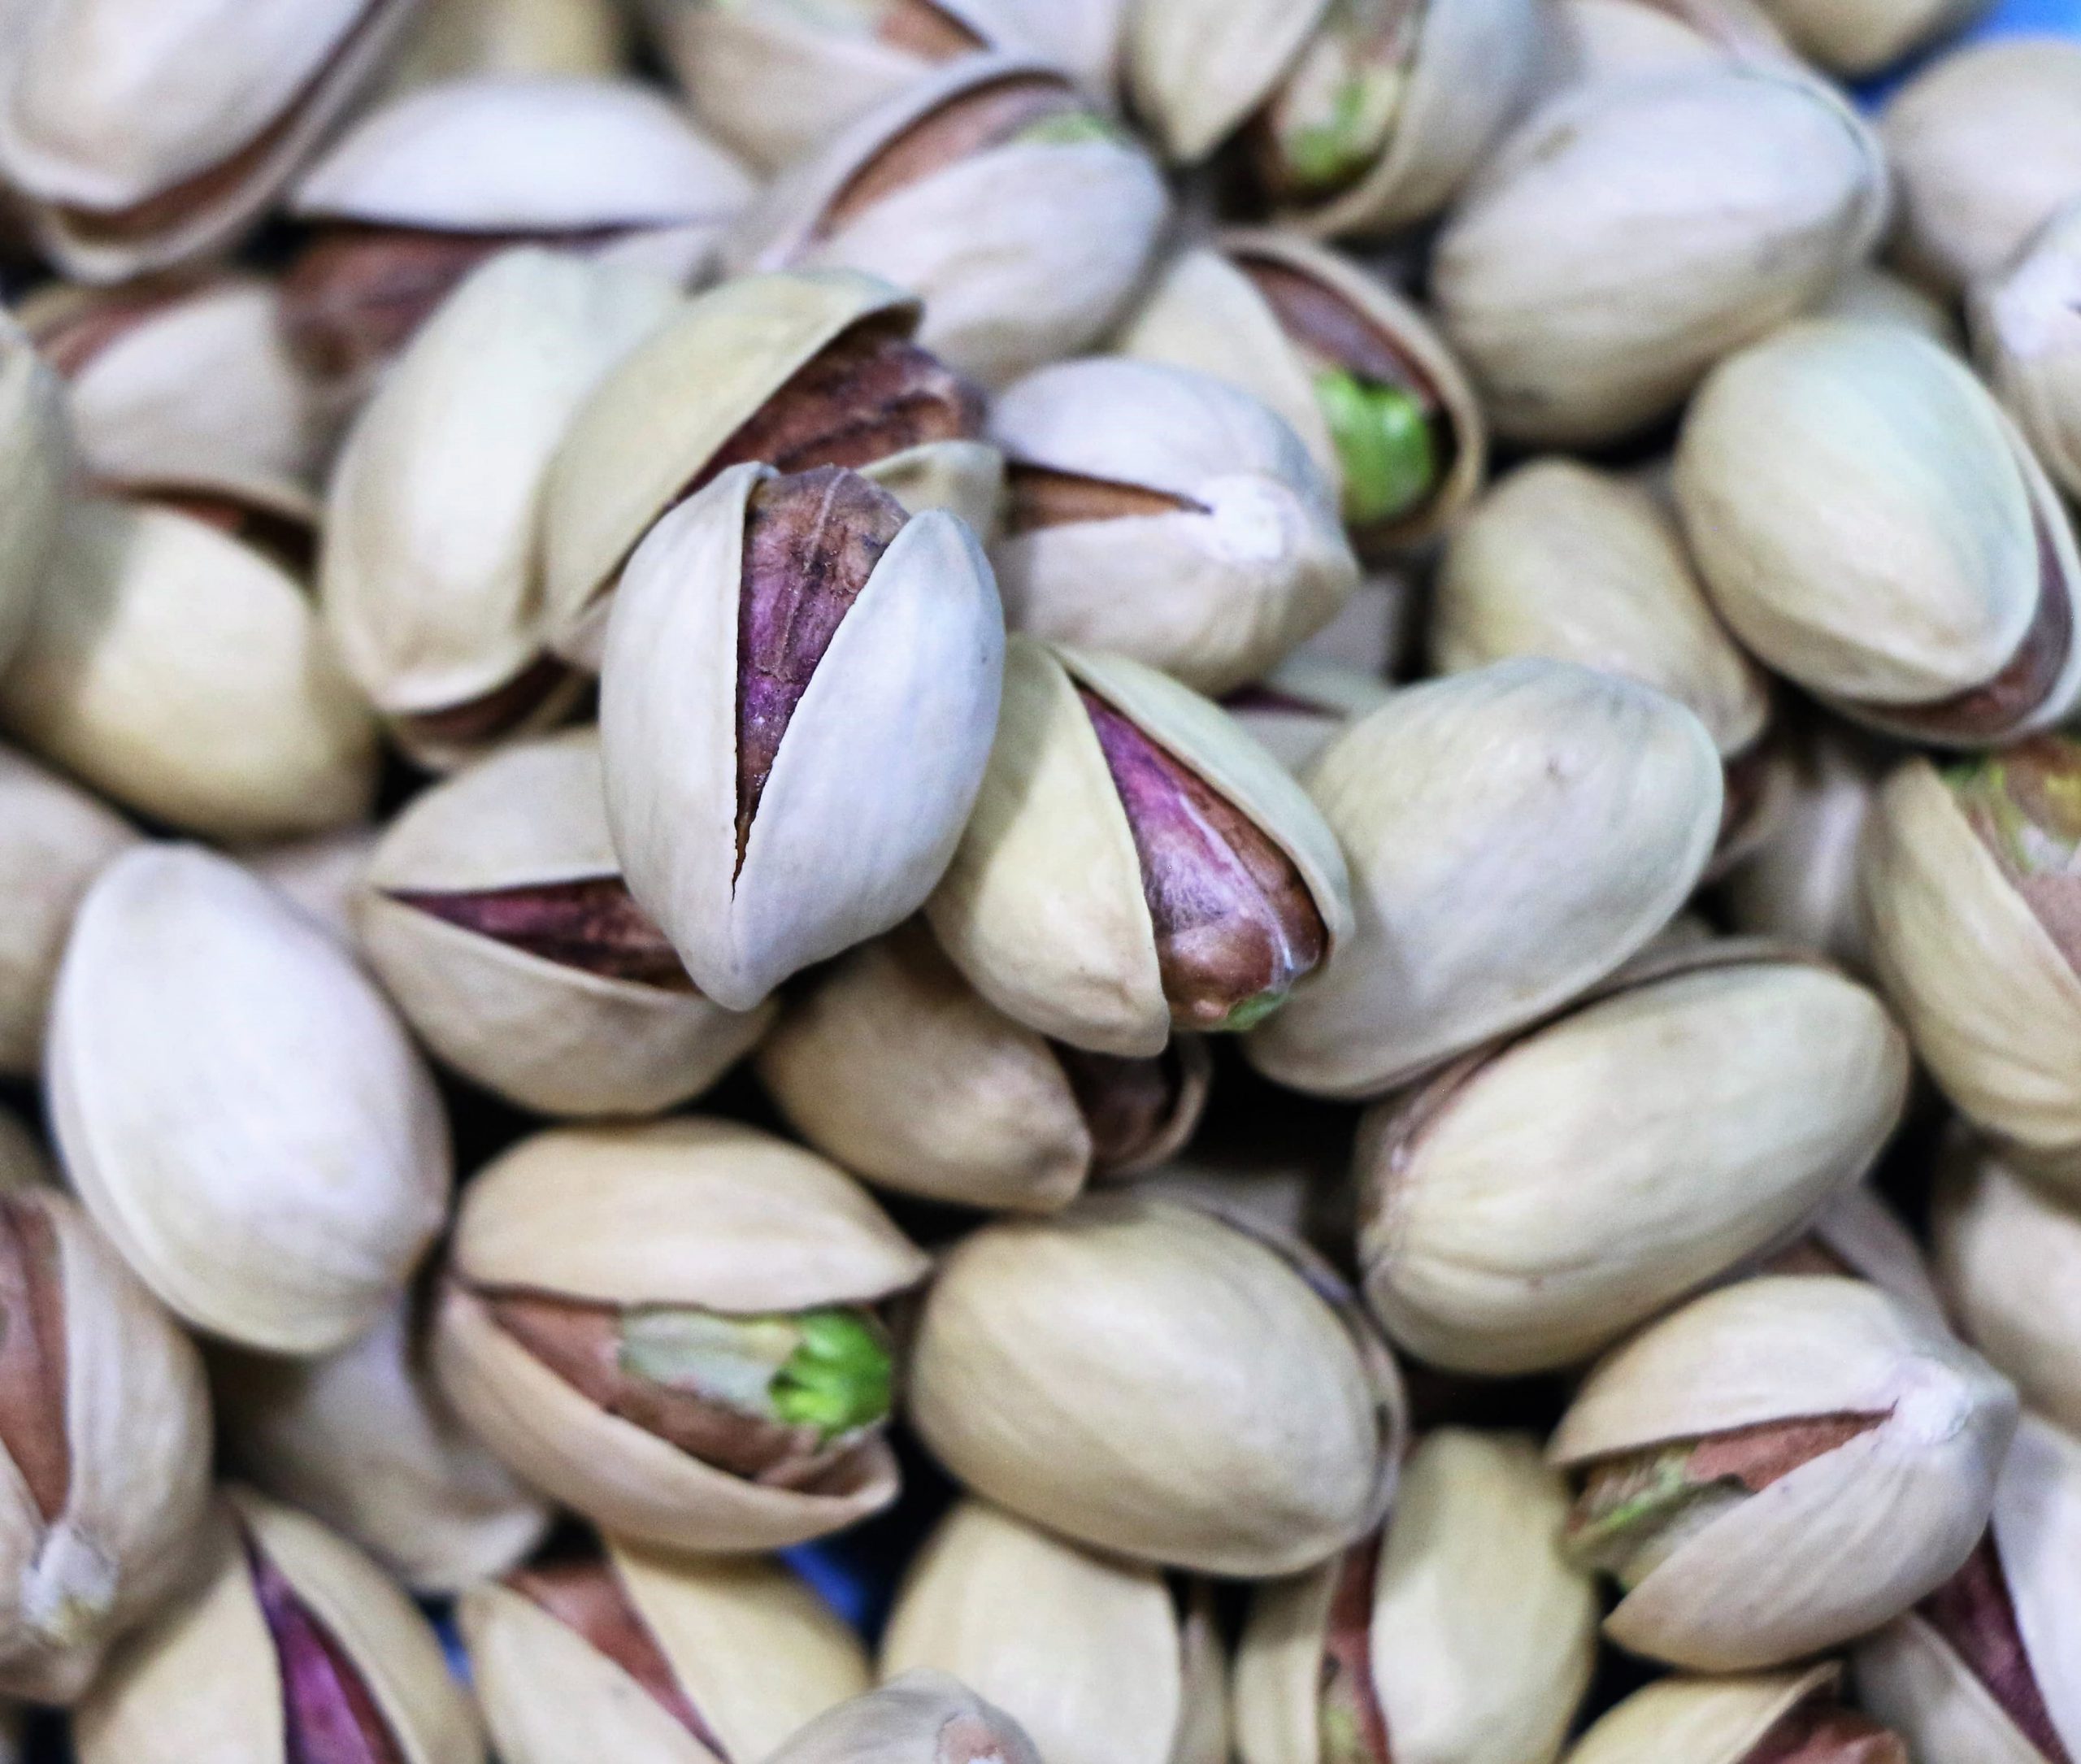 Export of almonds and pistachios of Nutex company